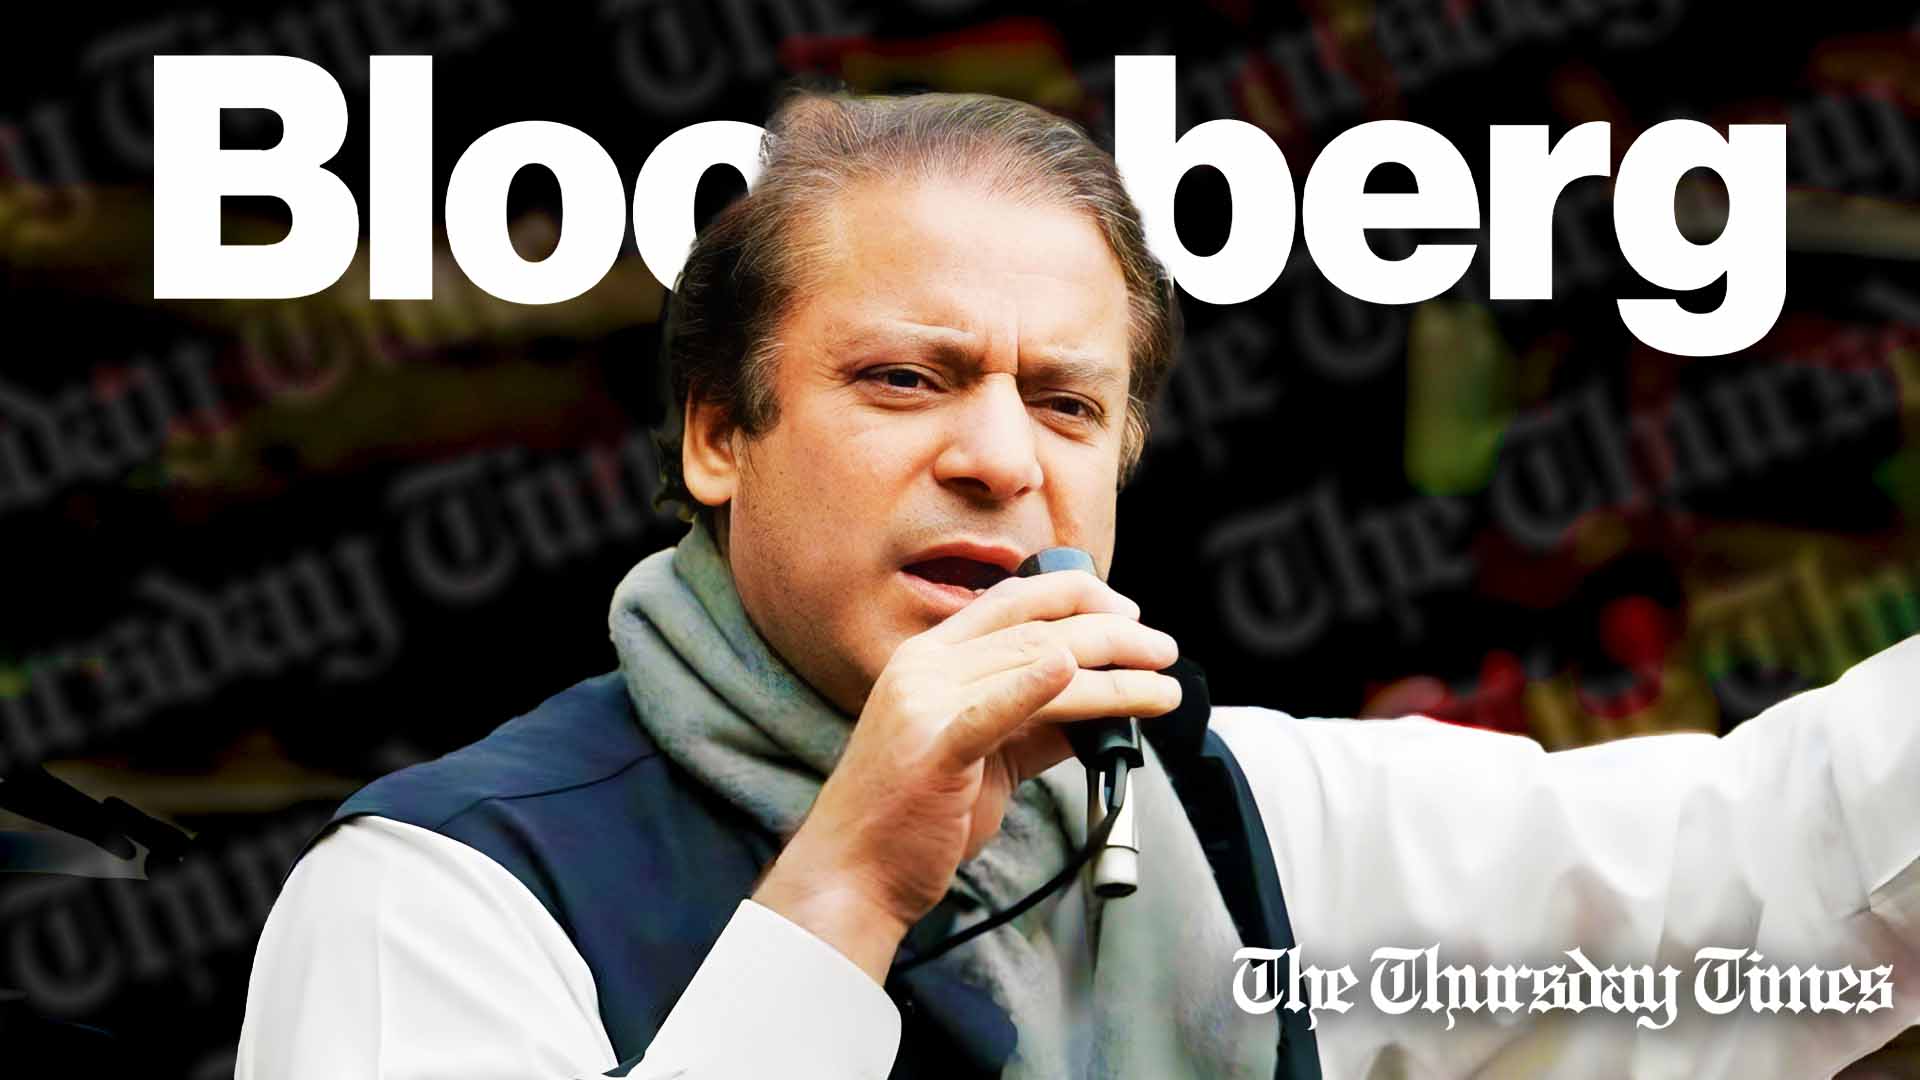 A file photo is shown of former Pakistani prime minister and incumbent PML(N) supremo Nawaz Sharif at Kohala on December 5, 2007. — FILE/THE THURSDAY TIMES